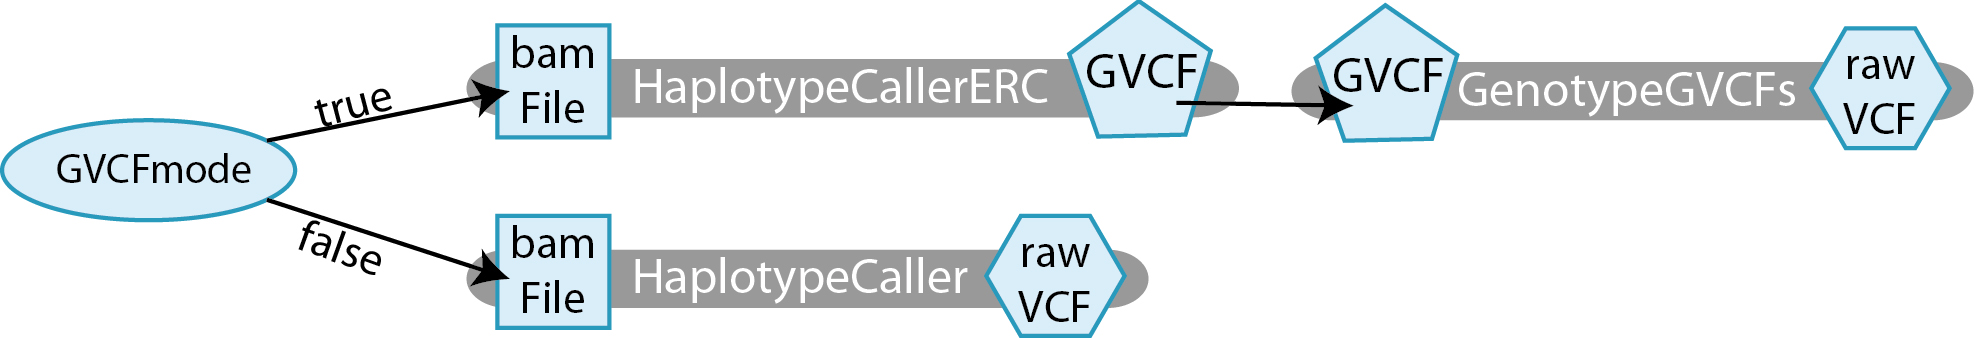 A diagram of a workflow that starts with the Boolean variable GVCFmode. If the Boolean is set to true, the workflow takes in a BAM file input and runs the task HaplotypeCallerERC, which produces a GVCF output. If the Boolean is false, the workflow takes in a a BAM input that runs through the task HaplotypeCaller, producing a raw VCF.